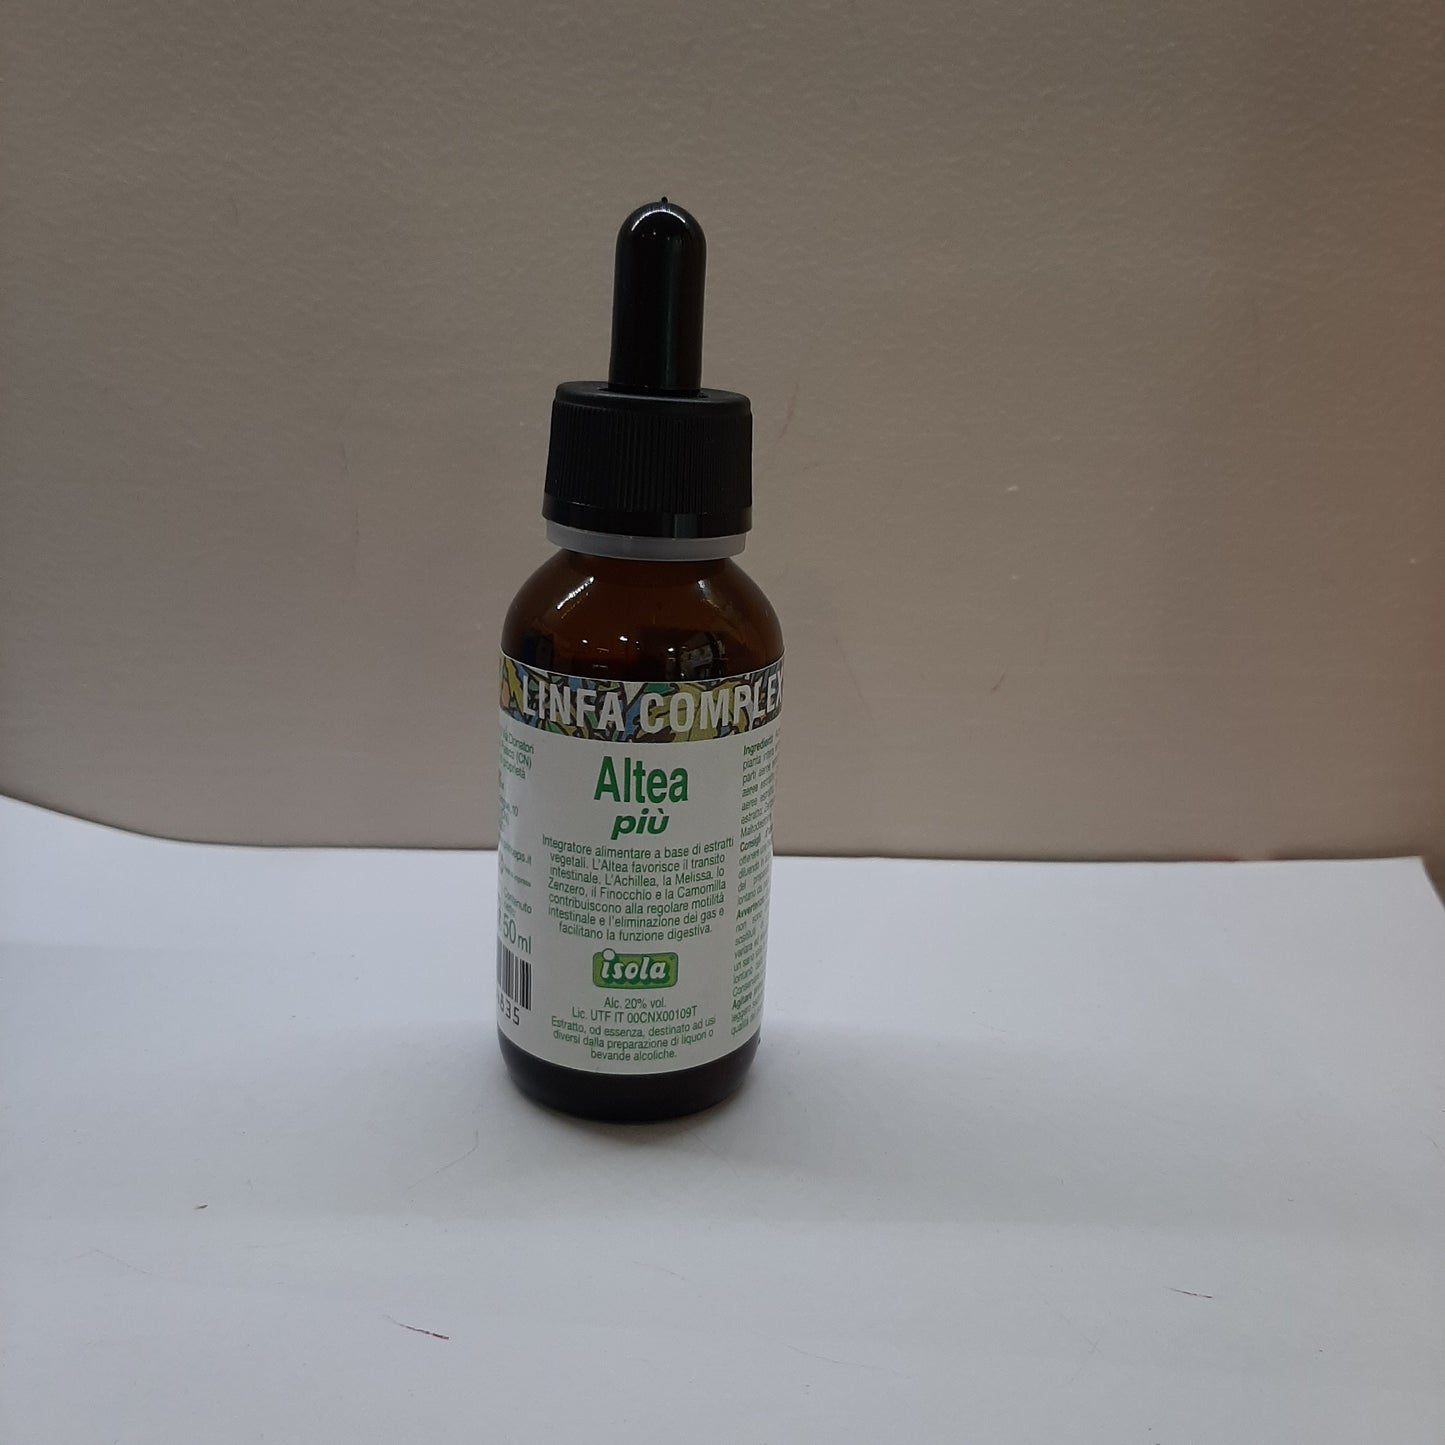 Altea mother tincture plus digestion and intestinal transit compounds 50ml expiry 02/2026 Princeps